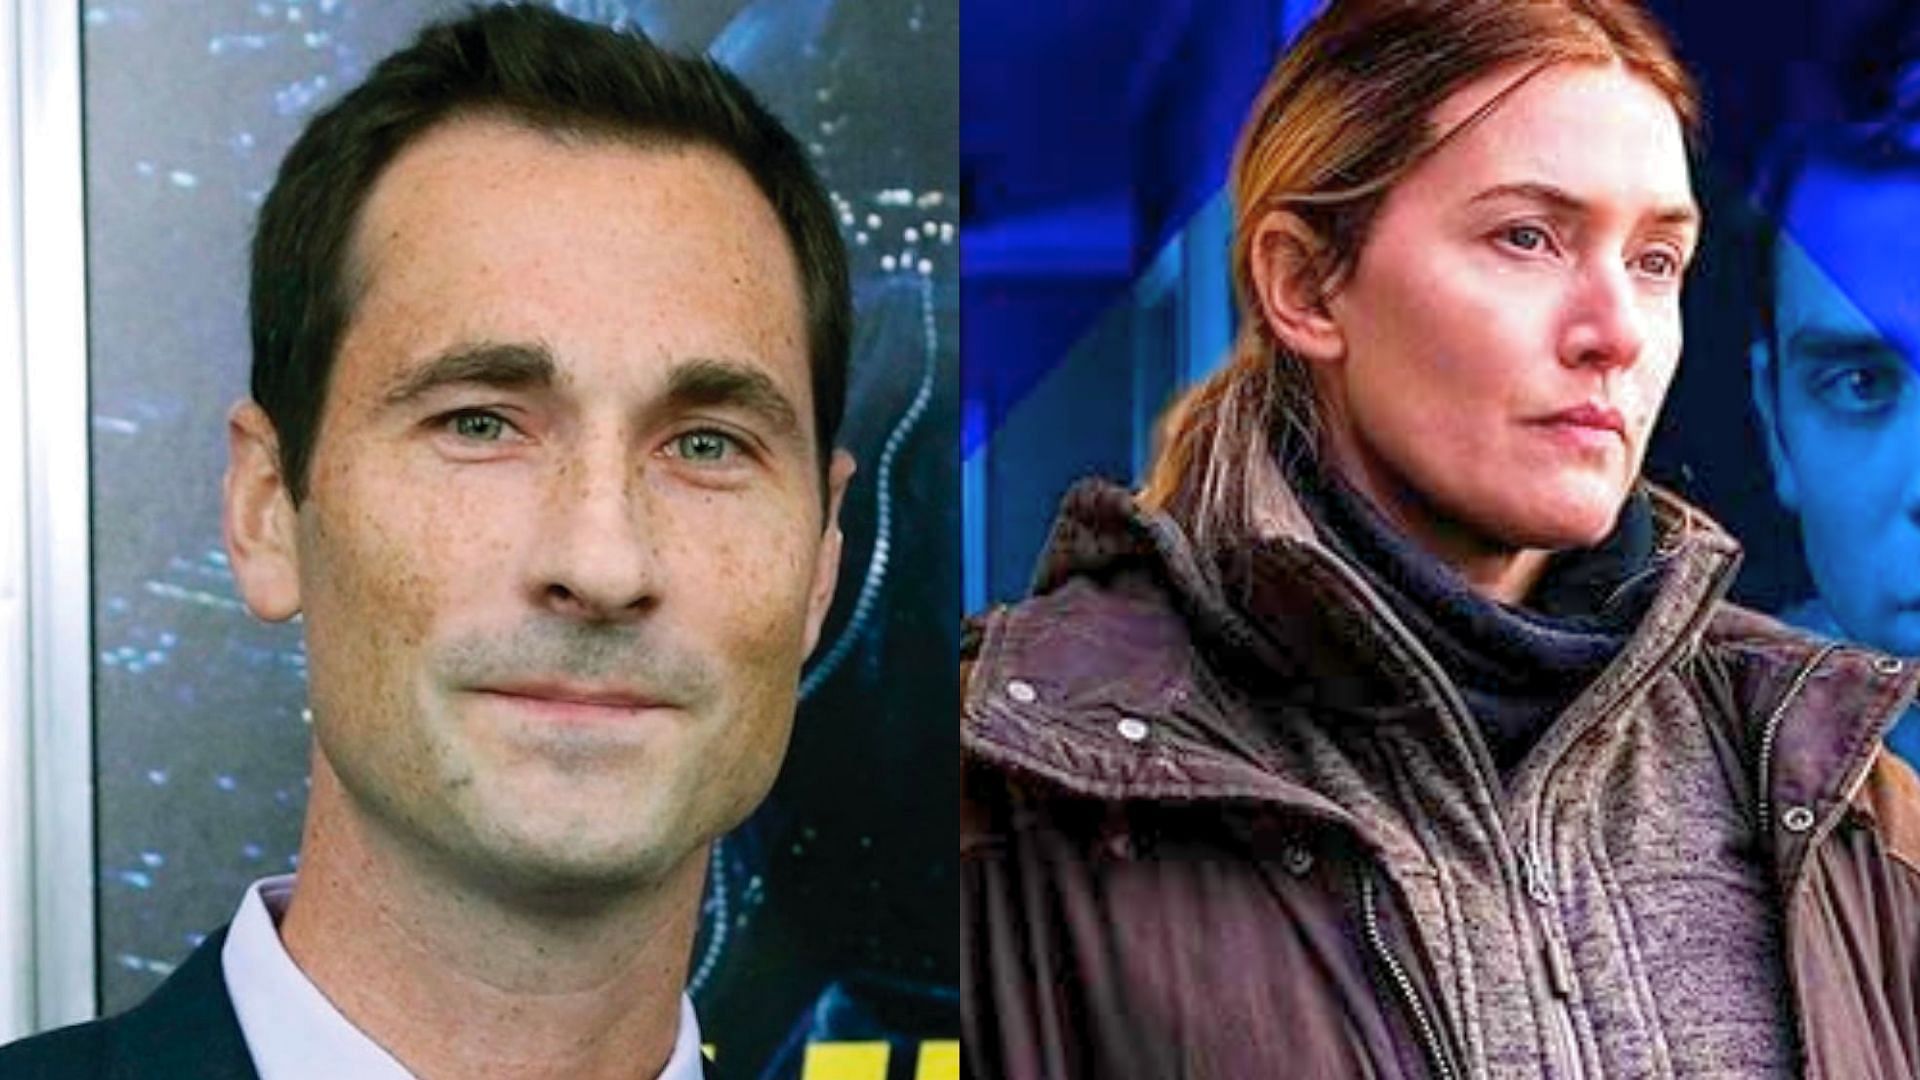 Brad Ingelsby (L) and Kate Winslet (R) are in with the concept (Images via IMDb and HBO)